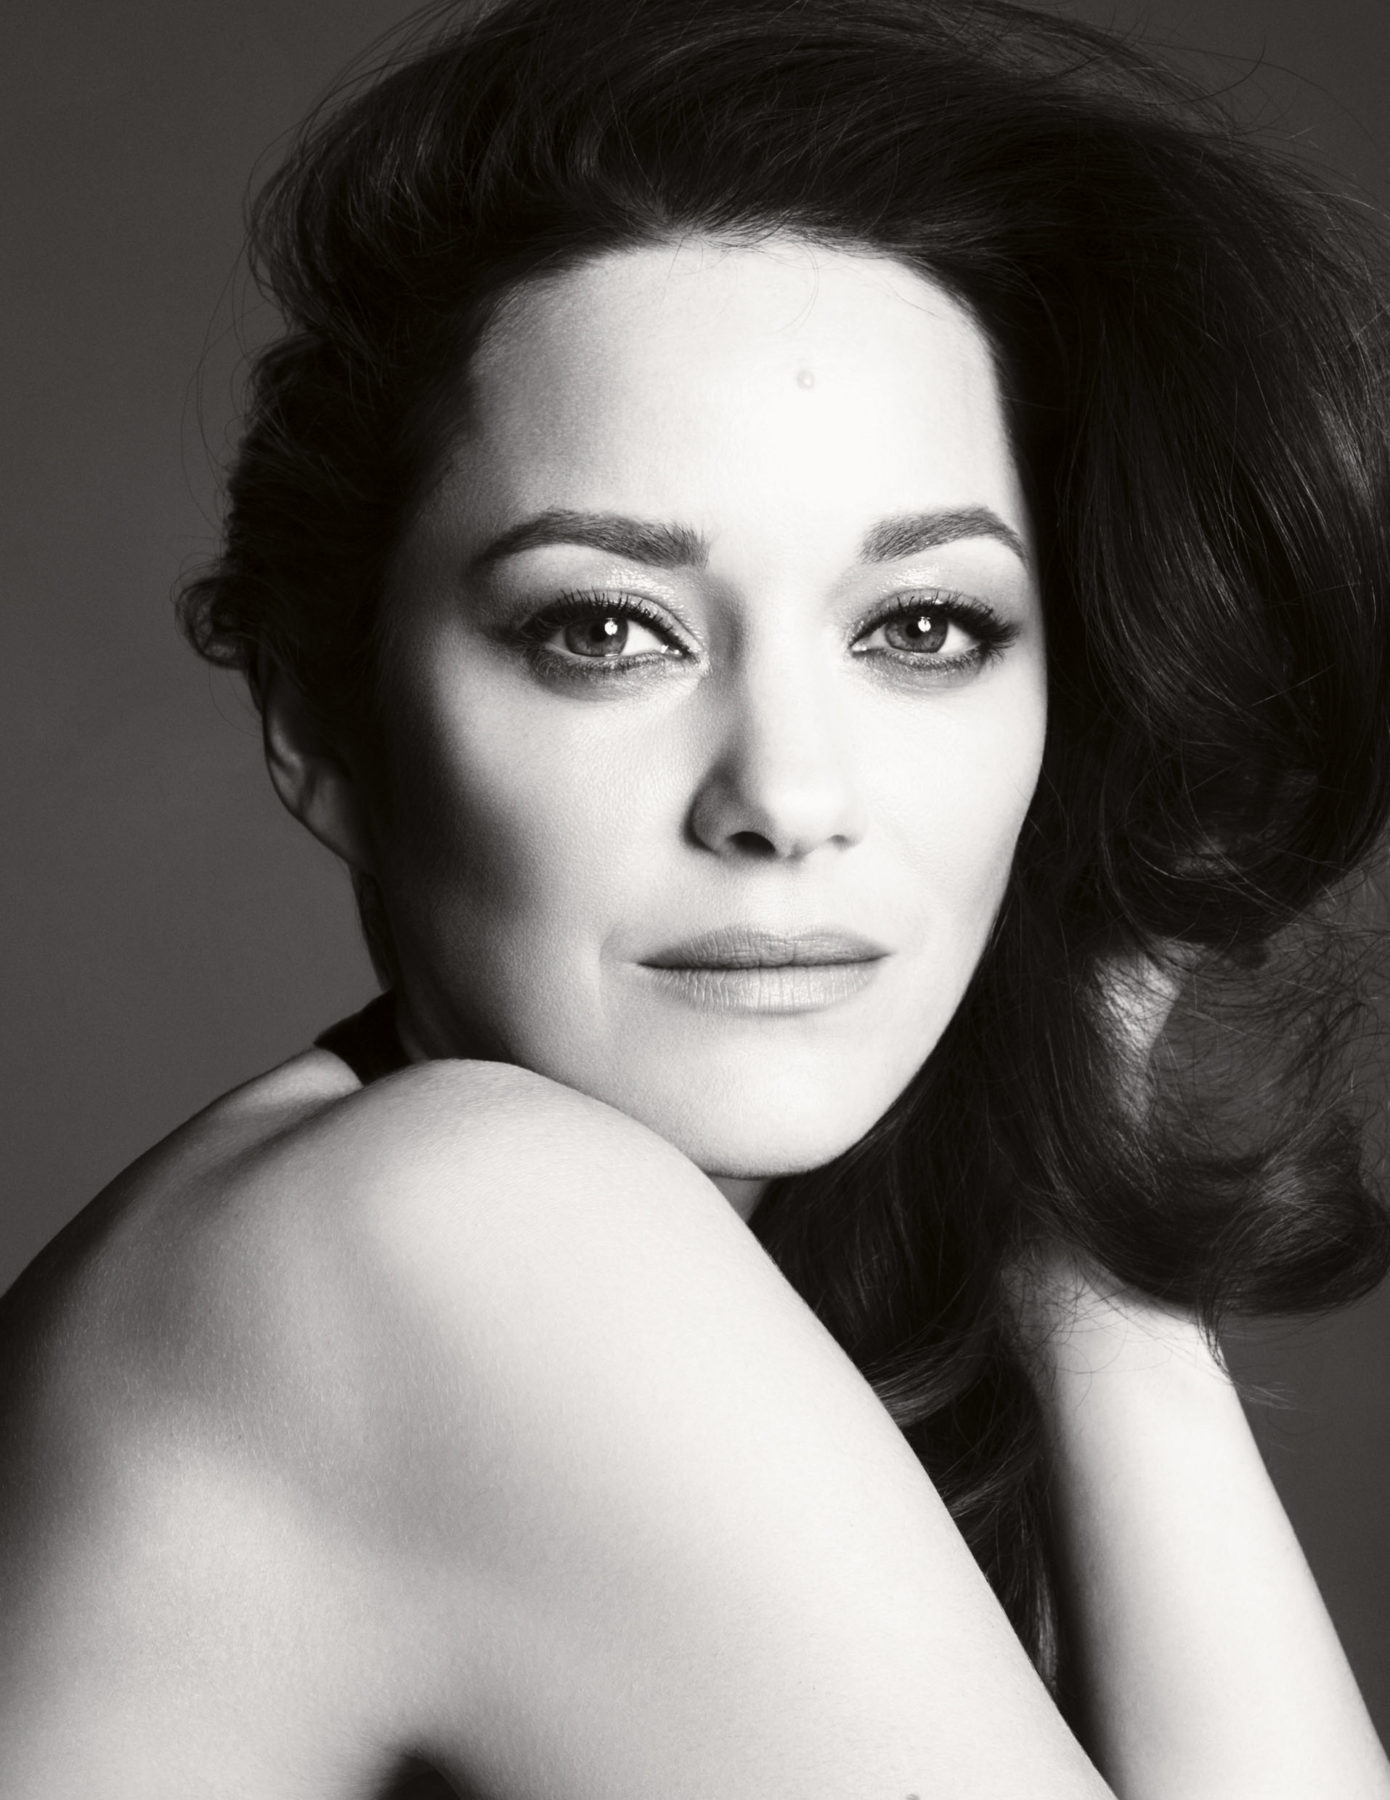 MARION COTILLARD BECOMES THE NEW FACE OF CHANEL N°5 - CRASH Magazine